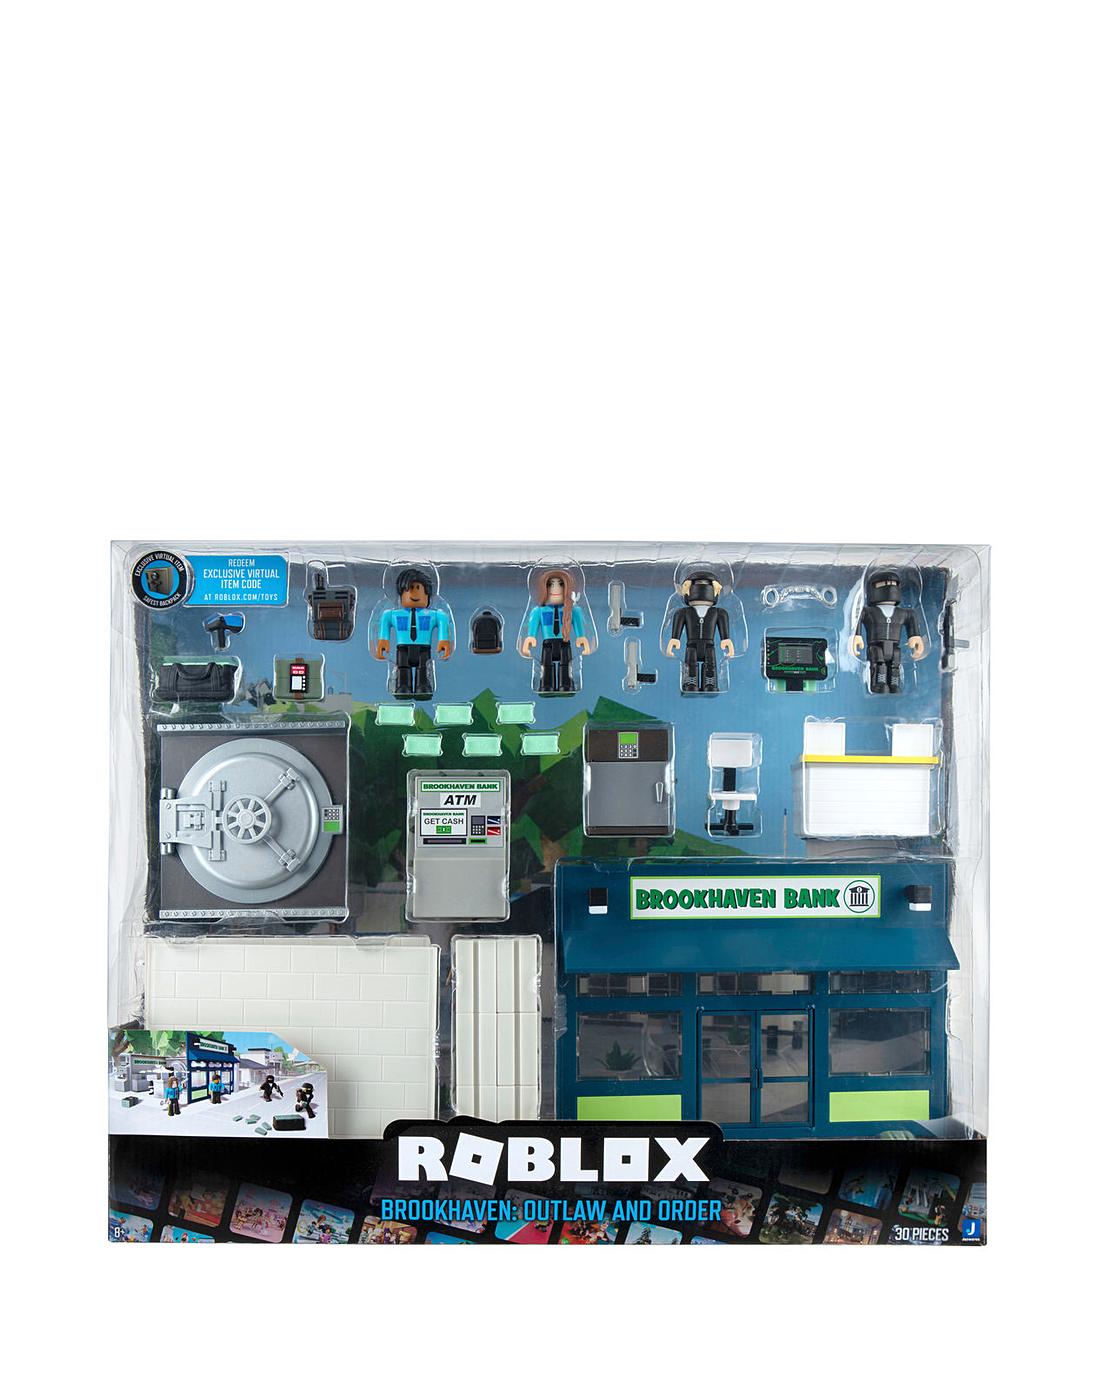 Roblox Brookhaven Outlaw & Order Playset